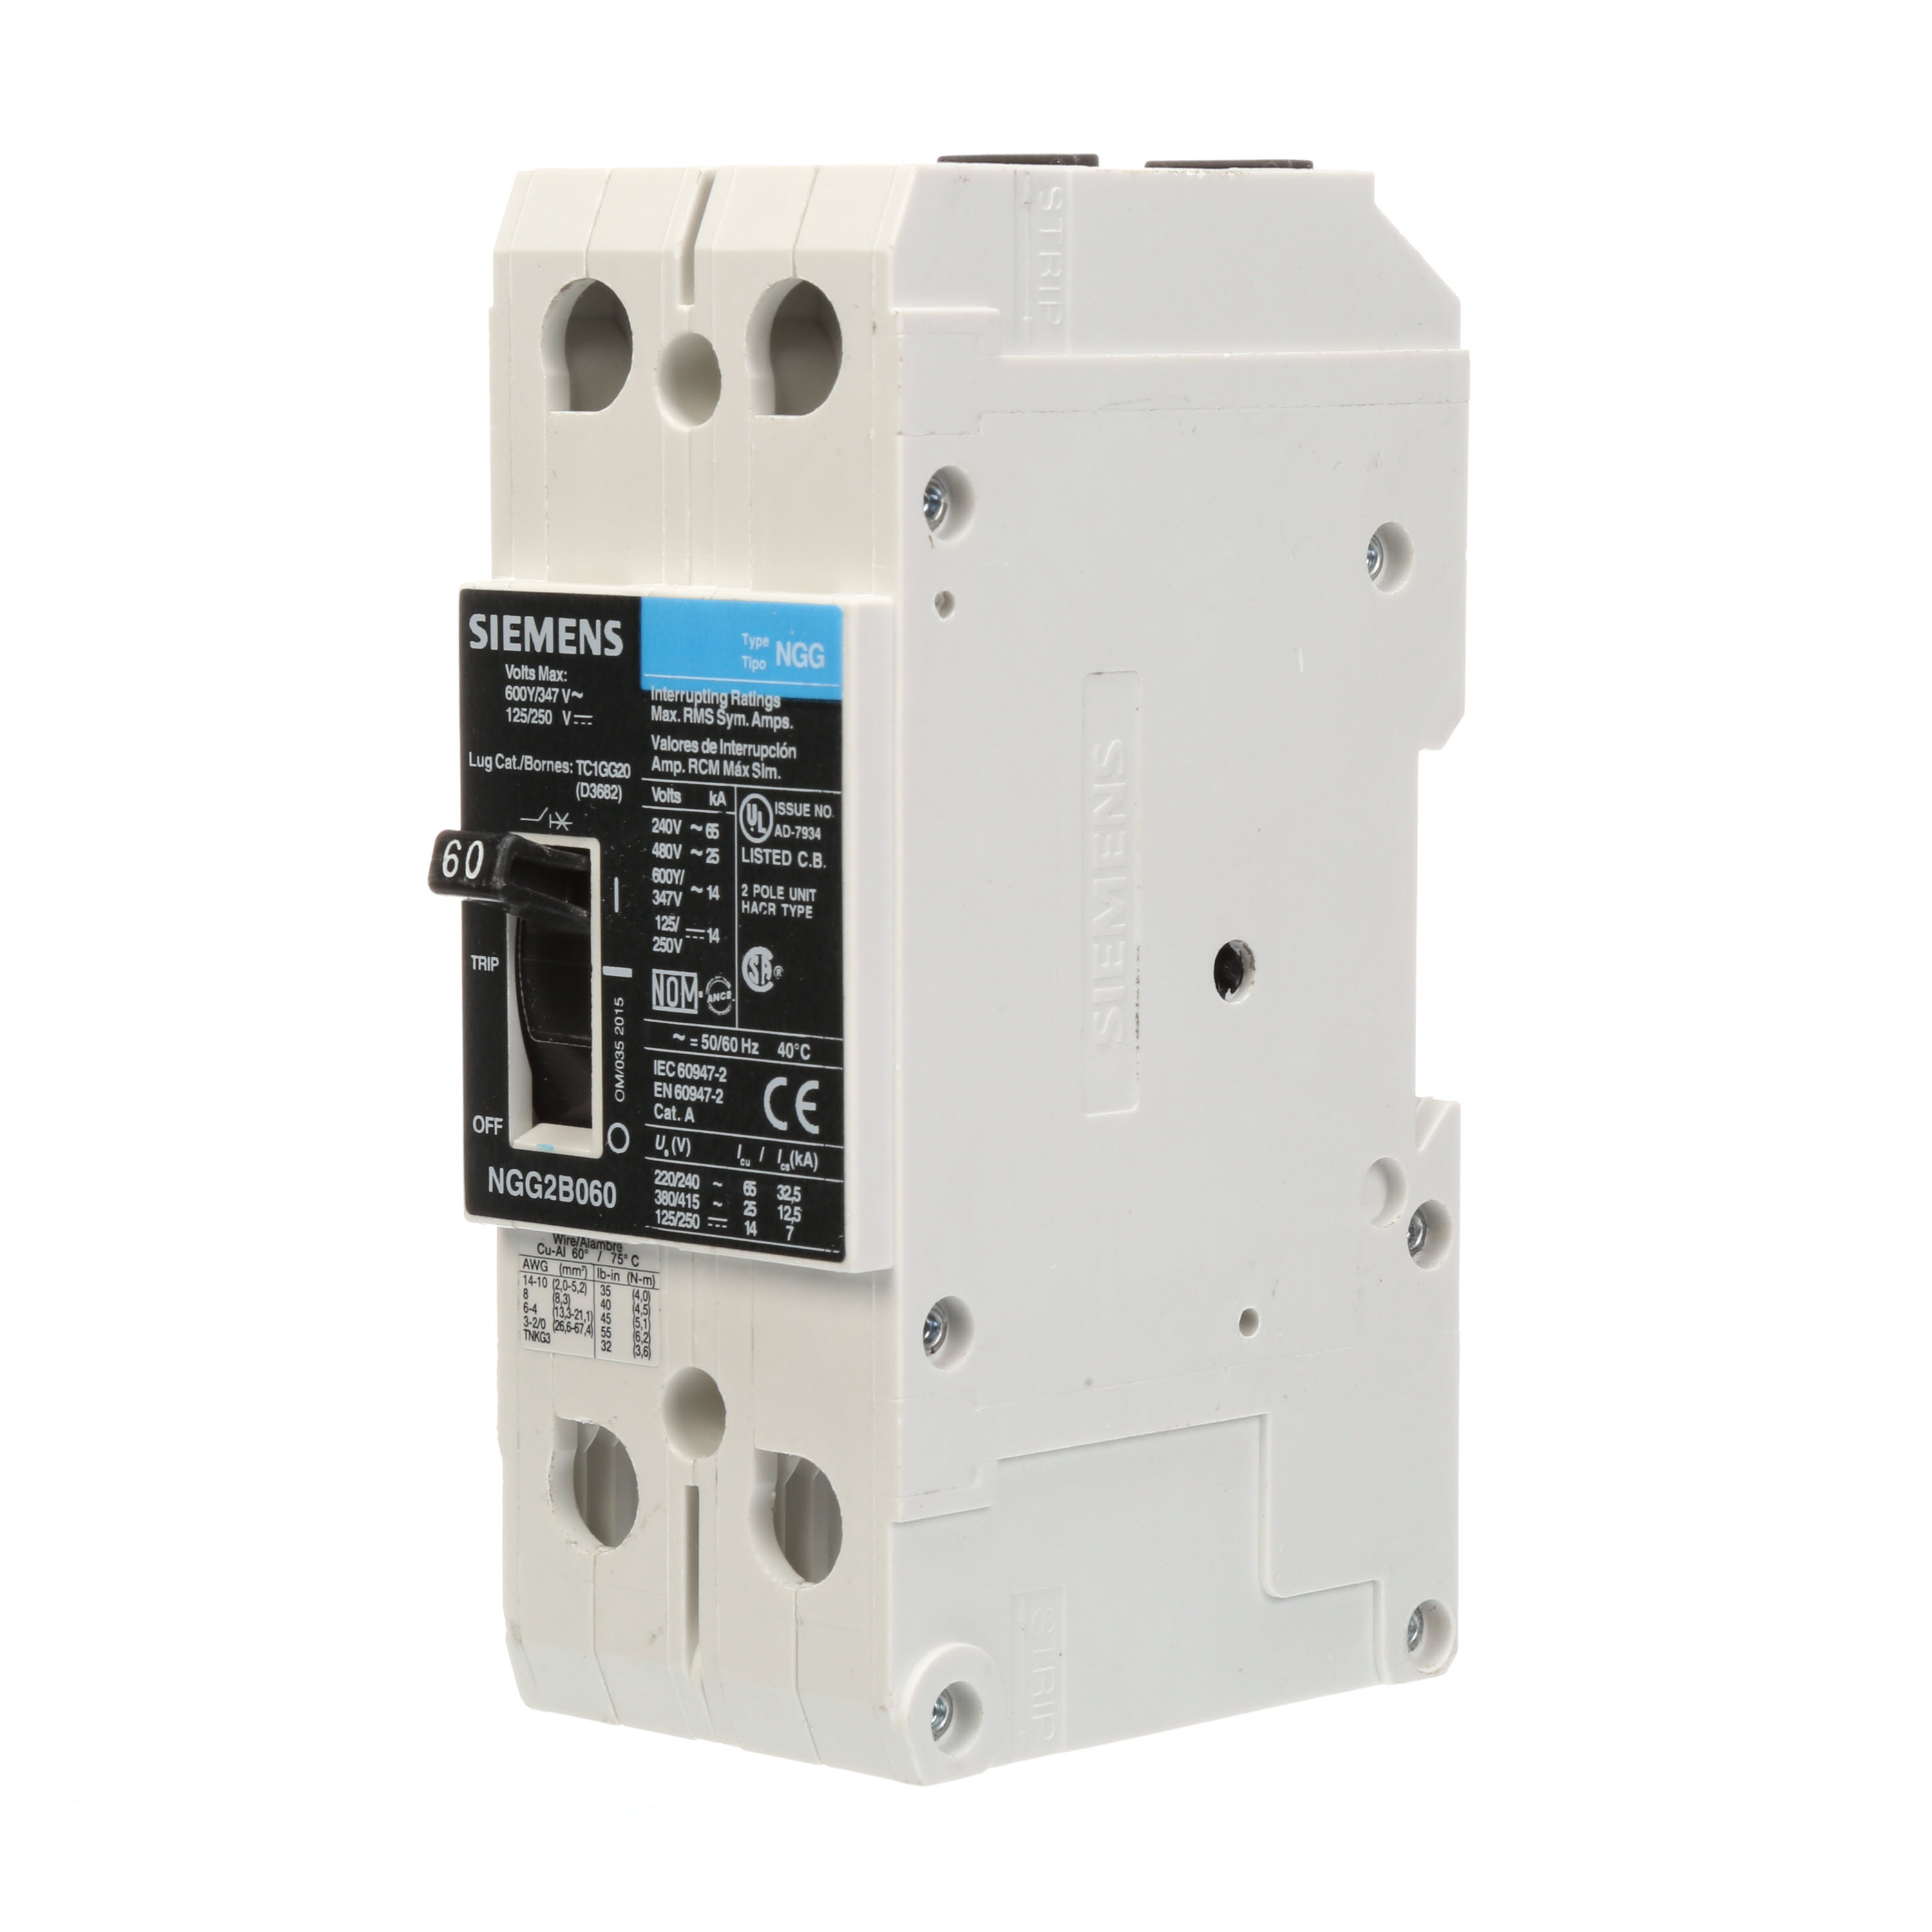 SIEMENS LOW VOLTAGE G FRAME CIRCUIT BREAKER WITH THERMAL - MAGNETIC TRIP. UL LISTED NGG FRAME WITH STANDARD BREAKING CAPACITY. 60A 2-POLE (14KAIC AT 600Y/347V)(25KAIC AT 480V). SPECIAL FEATURES MOUNTS ON DIN RAIL / SCREW, LINE AND LOAD SIDE LUGS (TC1GG20) WIRE RANGE 8 - 1/0 AWS (CU/AL). DIMENSIONS (W x H x D) IN 2 x 5.4 x 2.8.